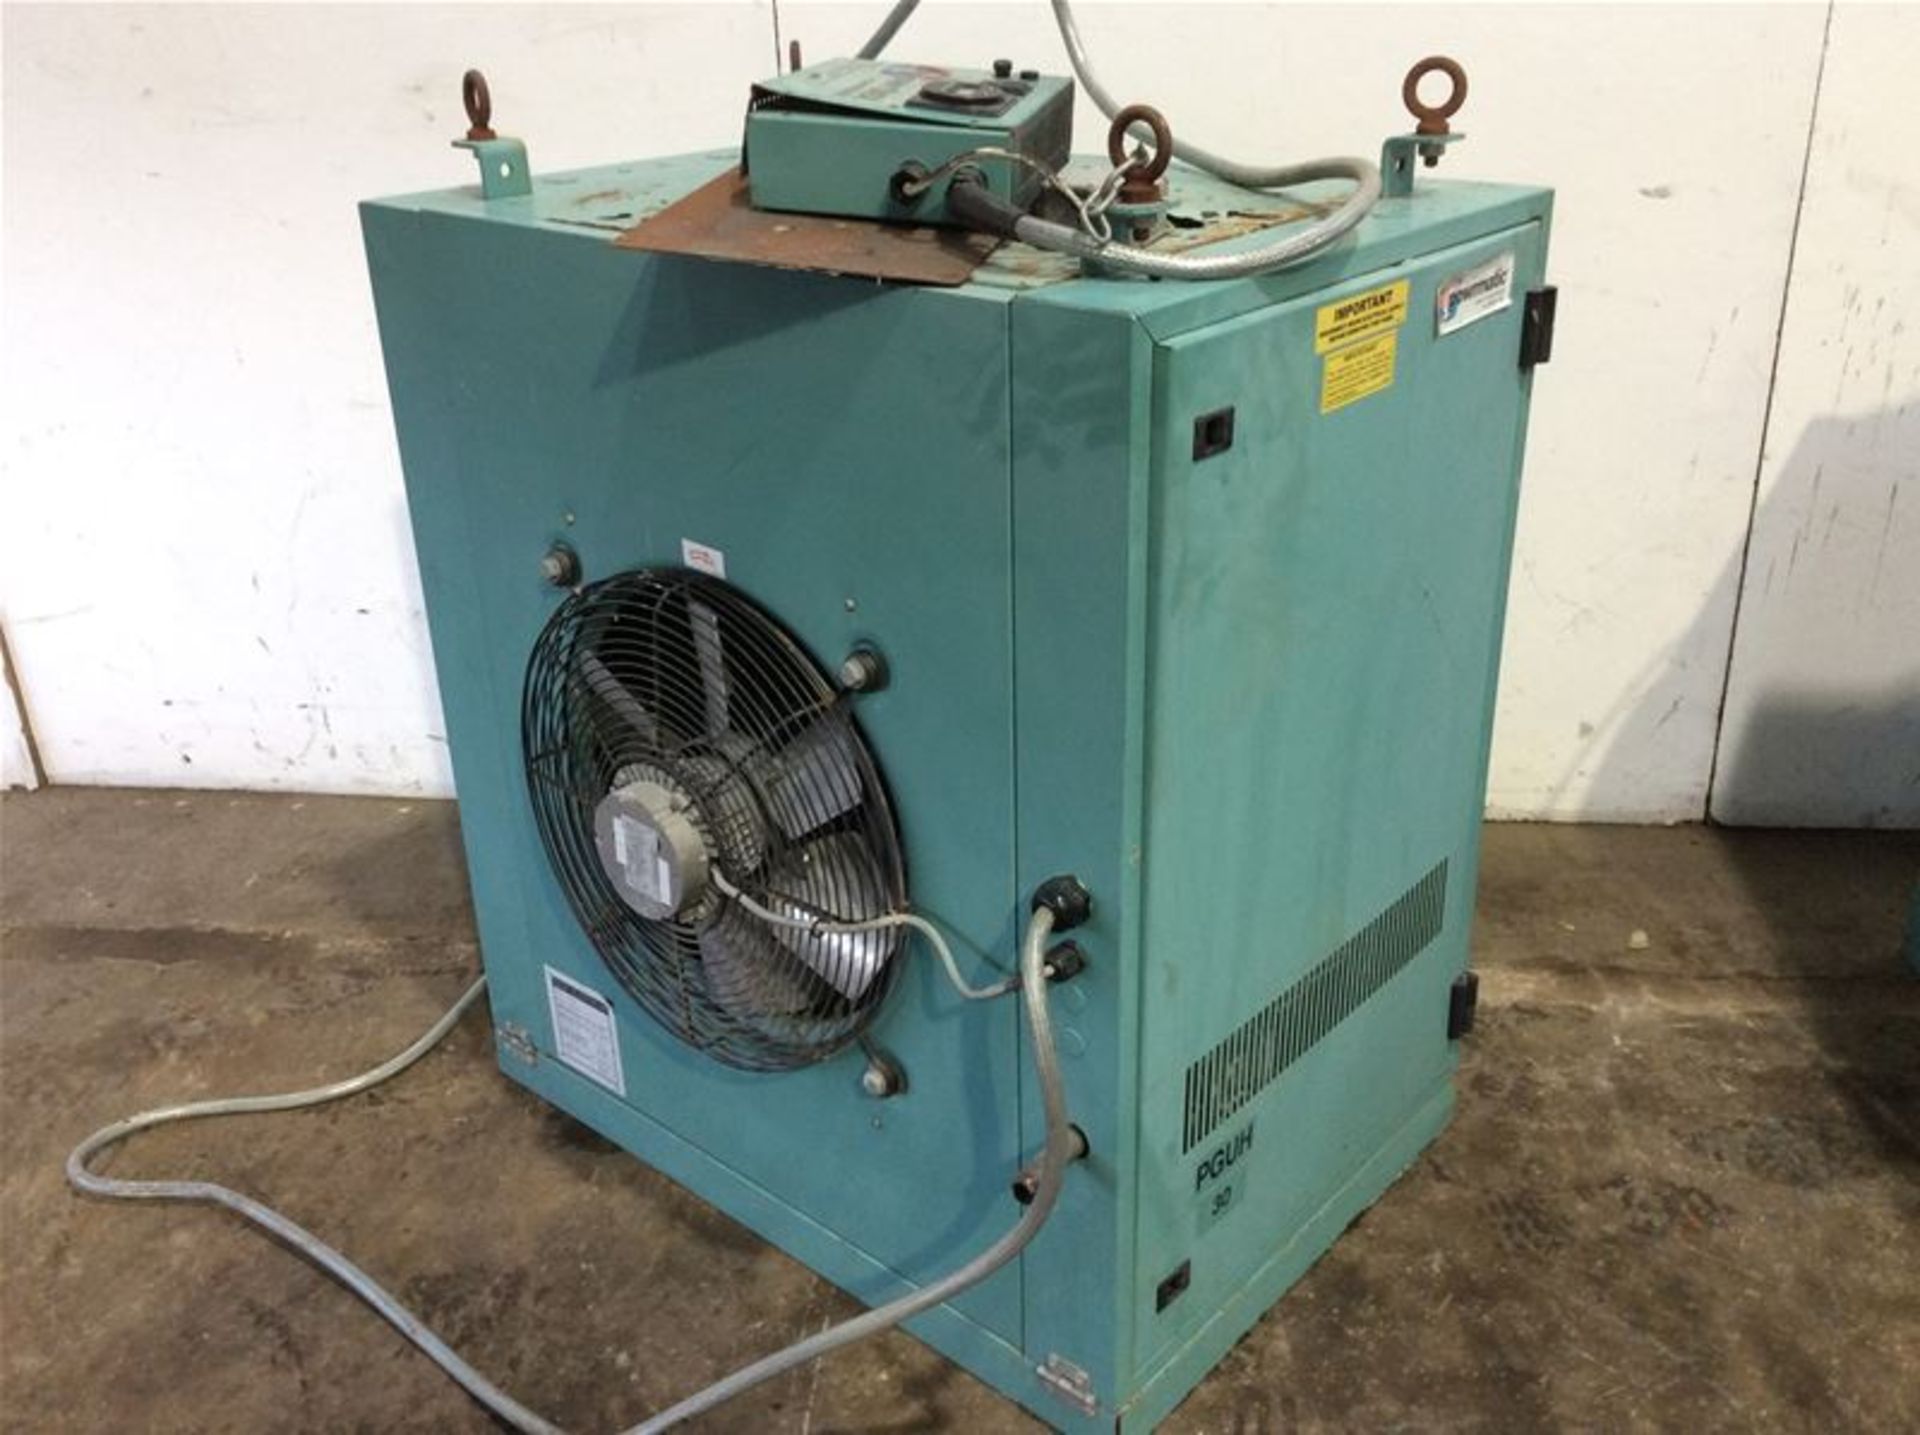 POWERMATIC PGUH 30 F SUSPENDED NATURAL GAS FIRED AIR HEATER UNIT - 30KW - Image 2 of 5